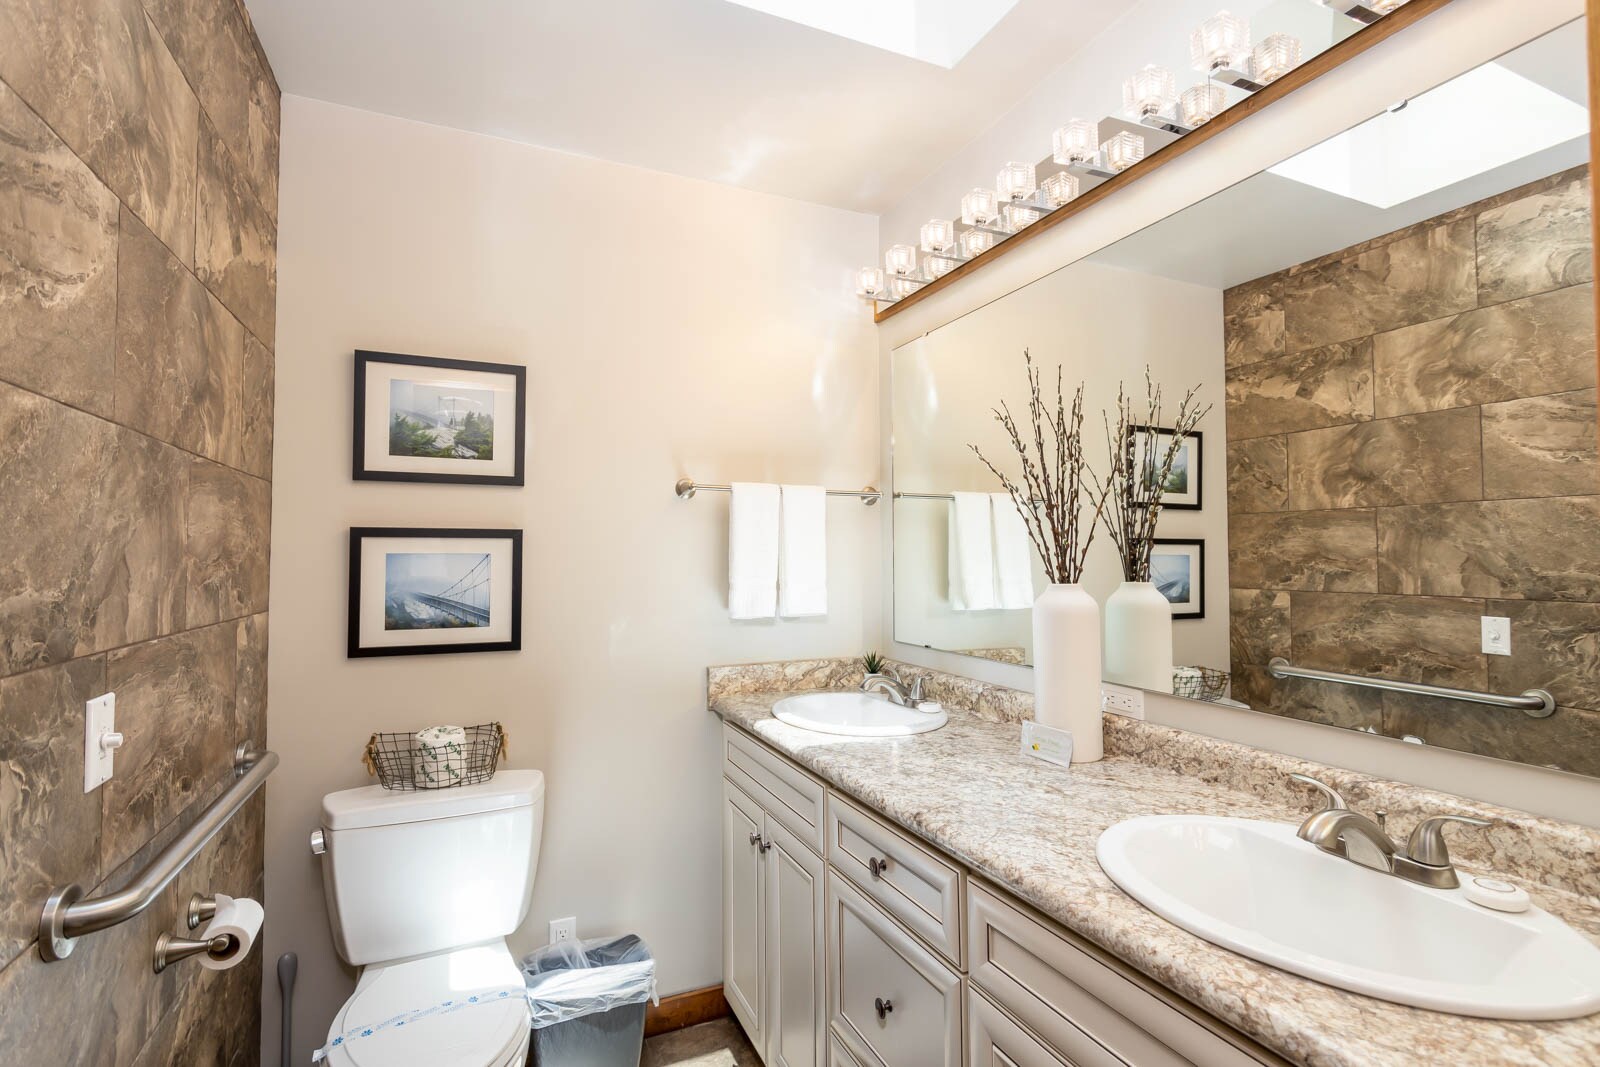 Private Ensuite Master Bathroom has Double Vanities and Large Tiled Shower